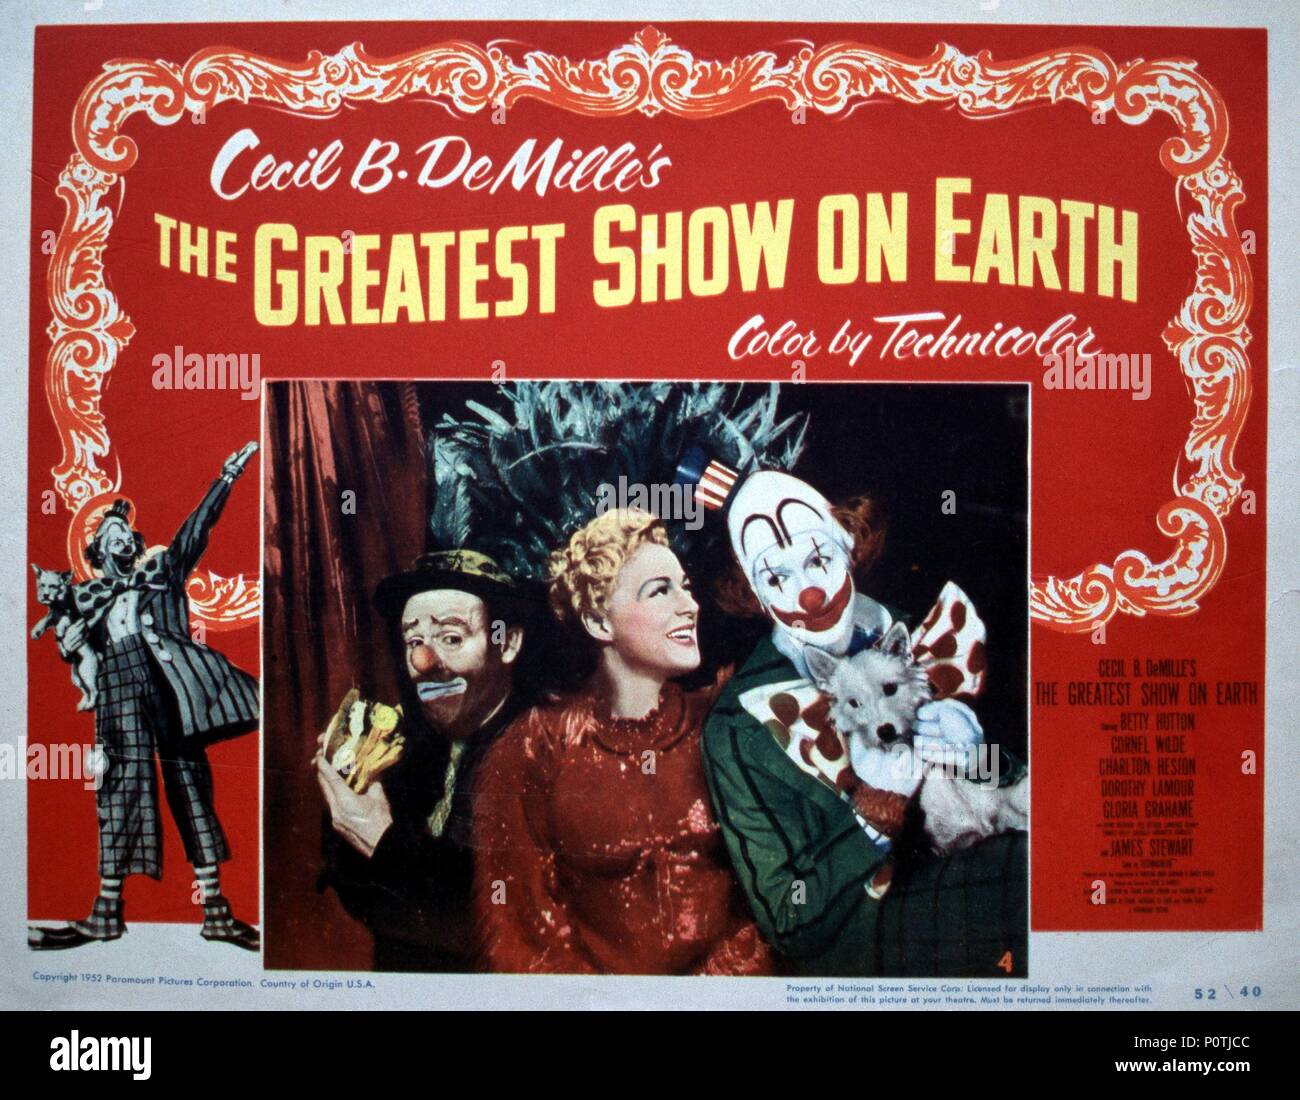 Original Film Title: THE GREATEST SHOW ON EARTH. English Title: THE  GREATEST SHOW ON EARTH. Film Director: CECIL B DEMILLE. Year: 1952. Credit:  PARAMOUNT PICTURES / Album Stock Photo - Alamy